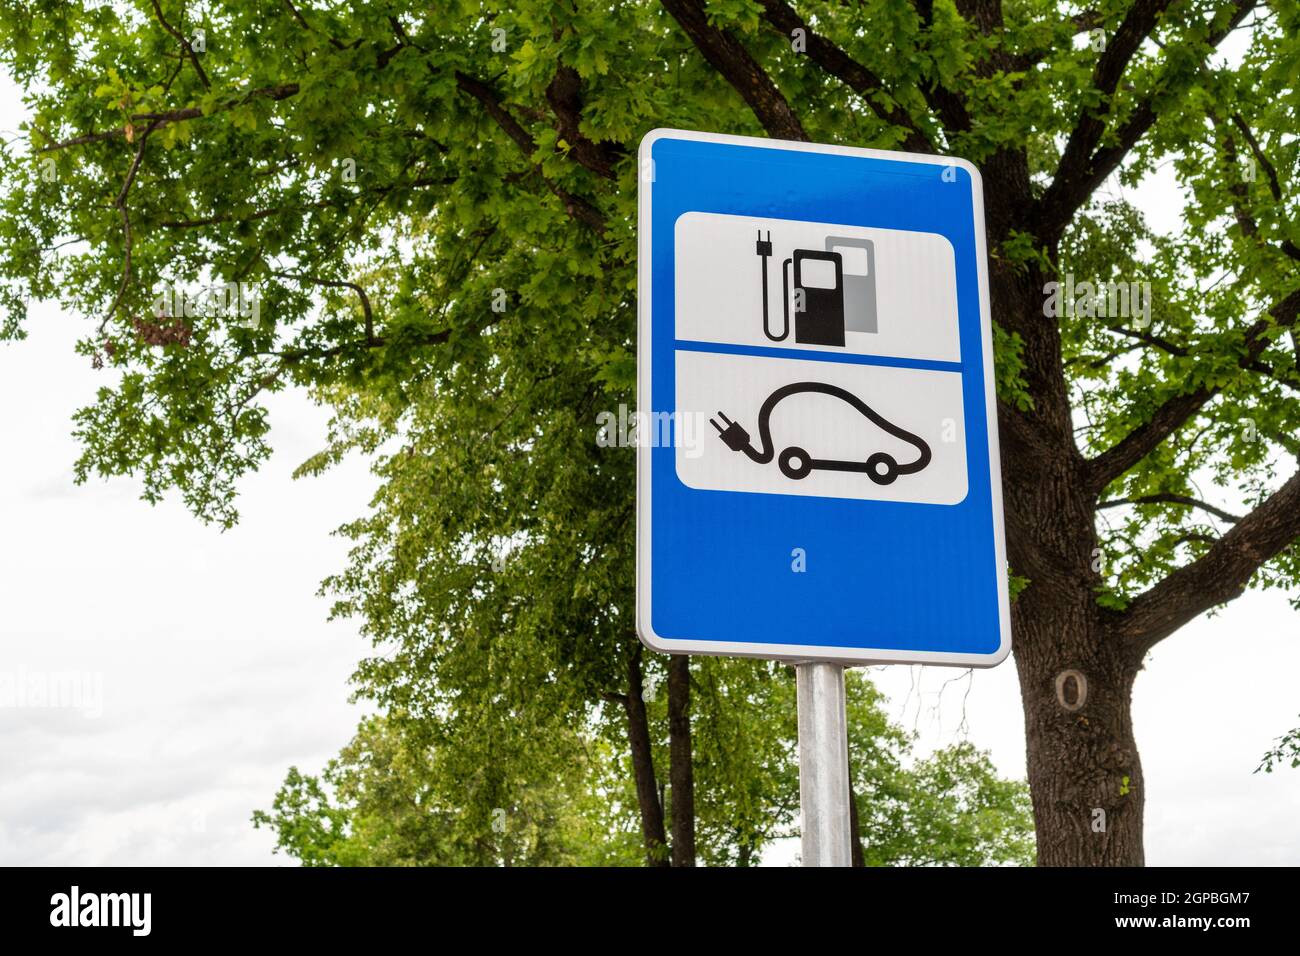 Electric car charging station road sign Stock Photo